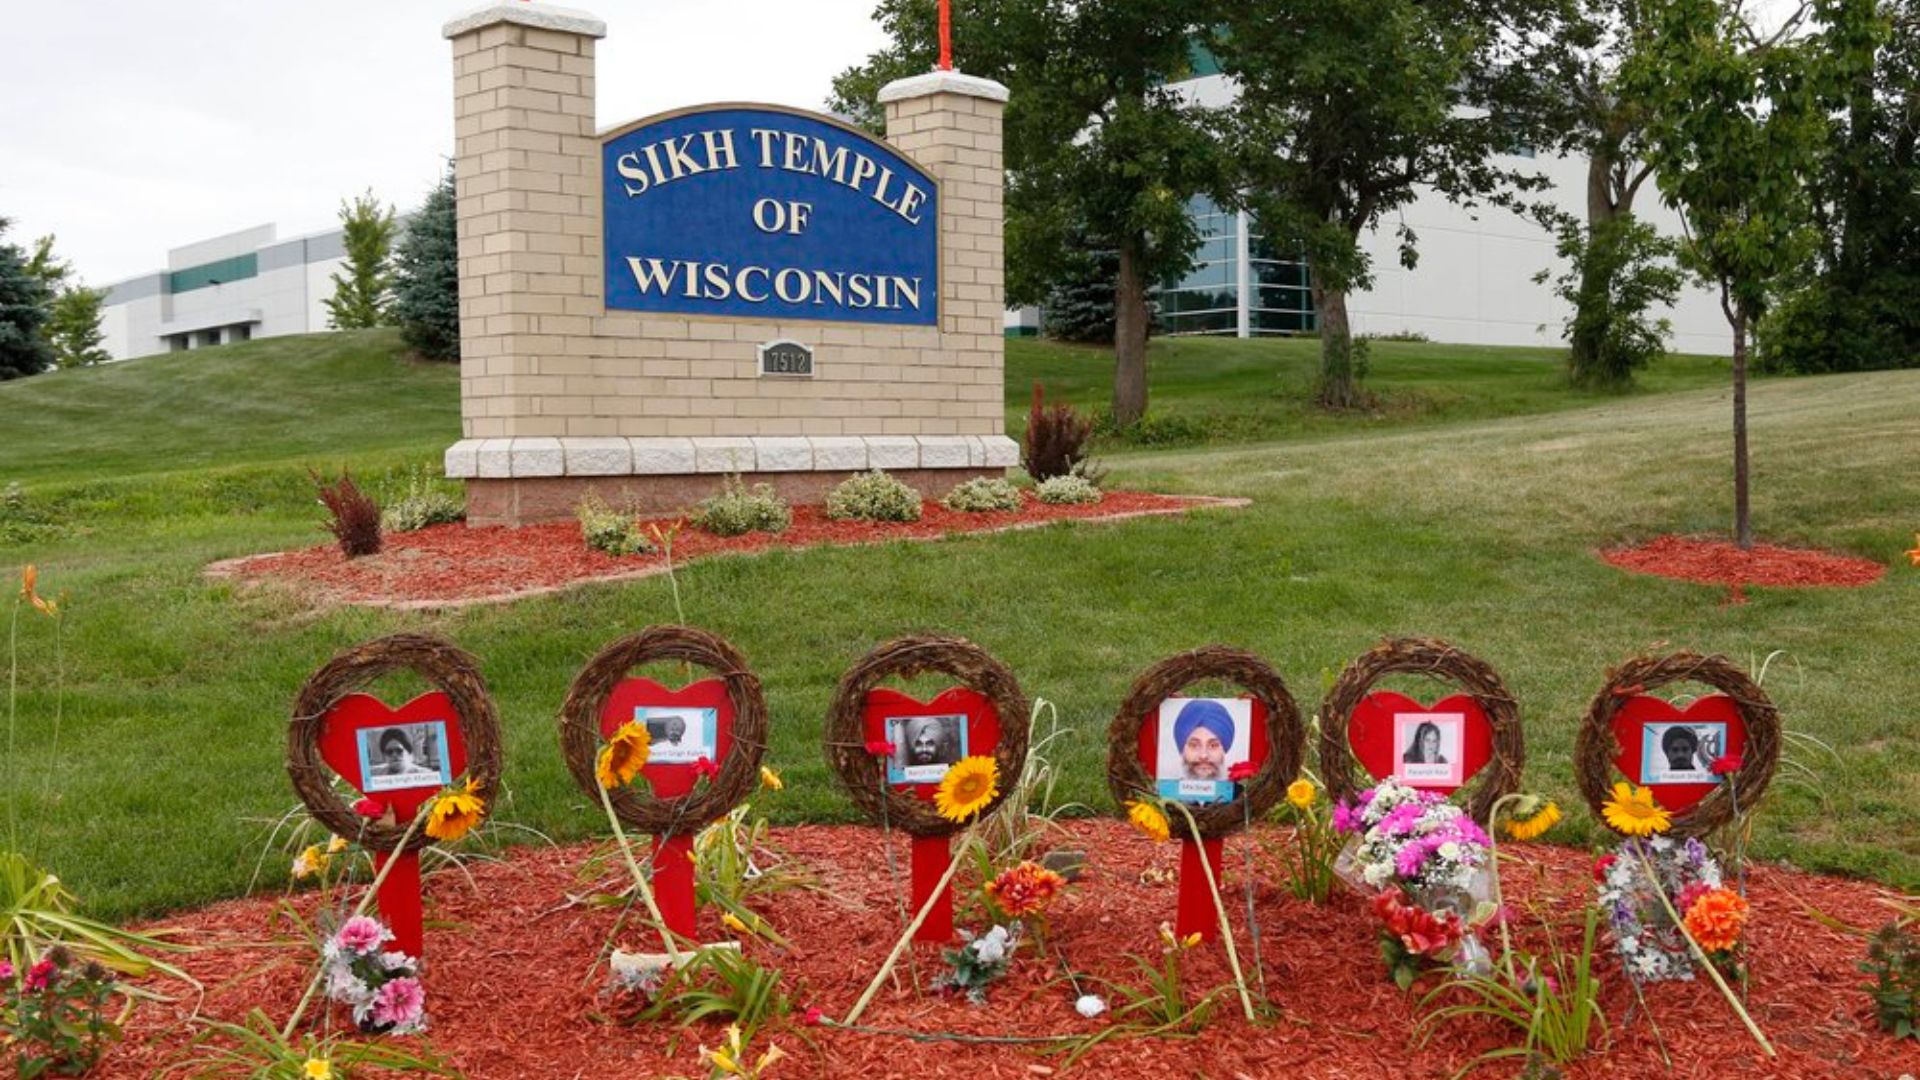 Photograph of a memorial for the victims of the Sikh Temple shooting in Wisconsin in front of the temple's sign. We are sharing the image to promote the upcoming Chardi Kala Community Event.